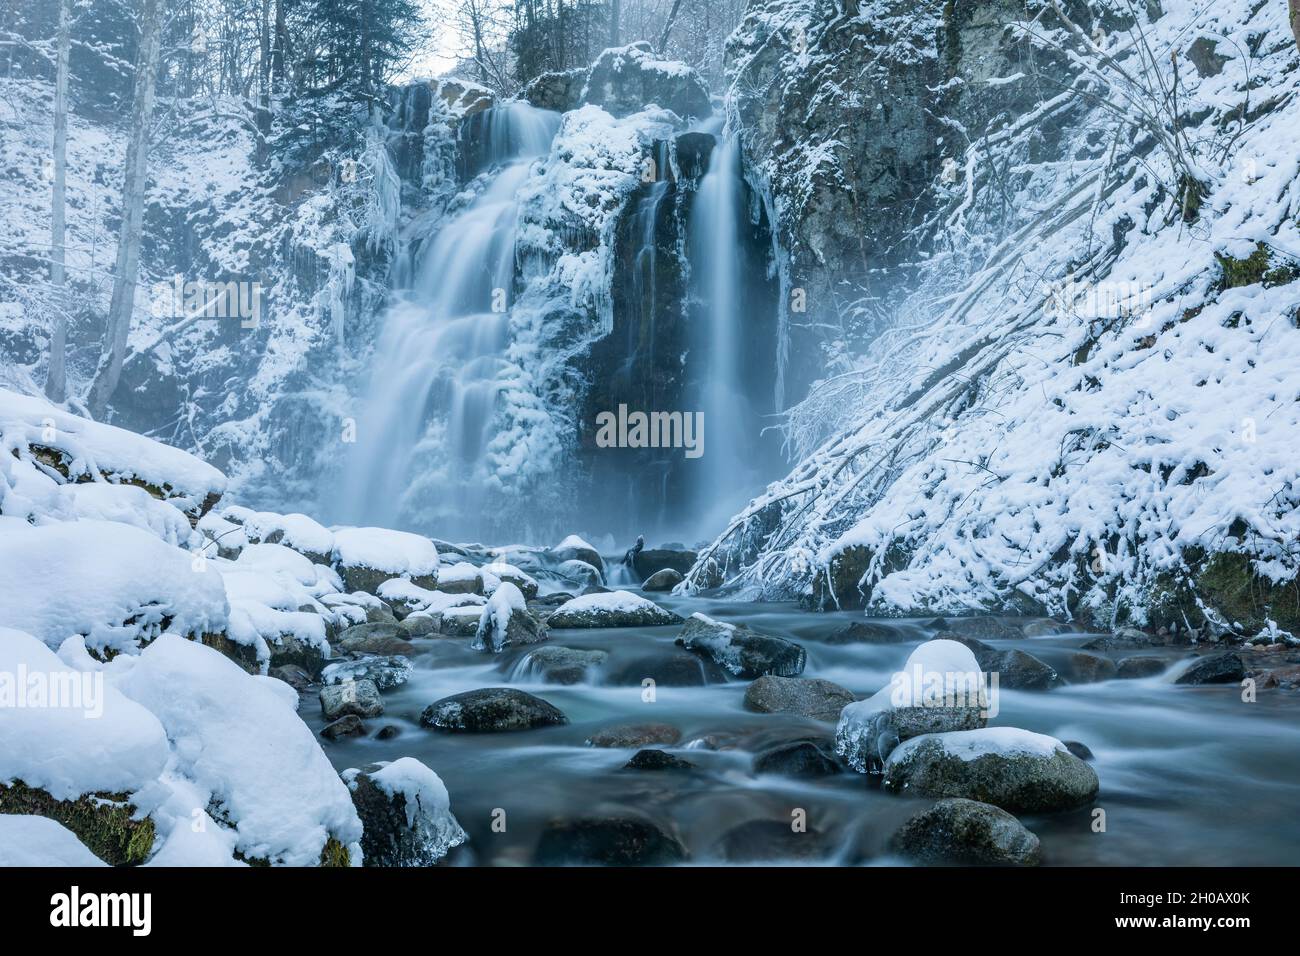 The Heidenbad waterfall in winter, Thur river, Alsace, France Stock Photo